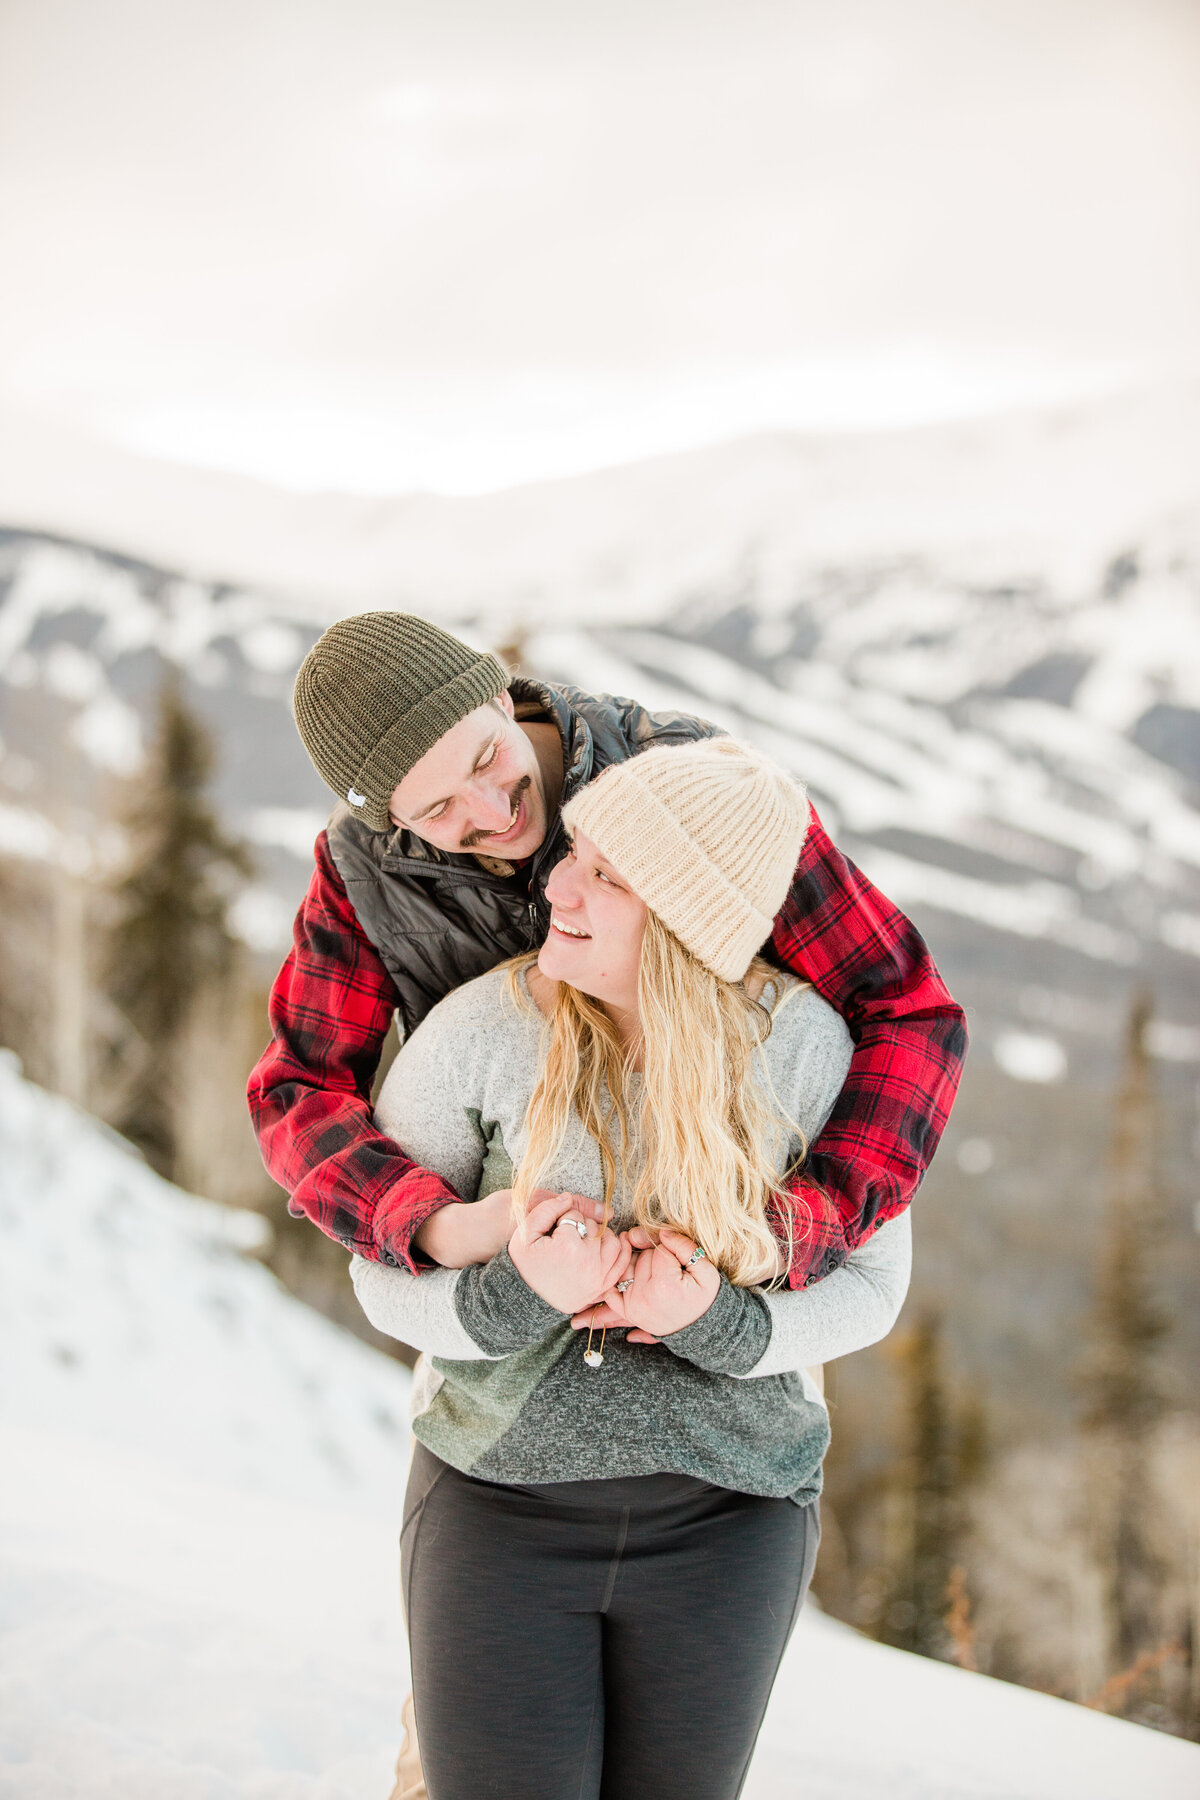 A man is embracing is fiance from behind. They are looking at one another smiling, with Breckenridge Mountain behind them